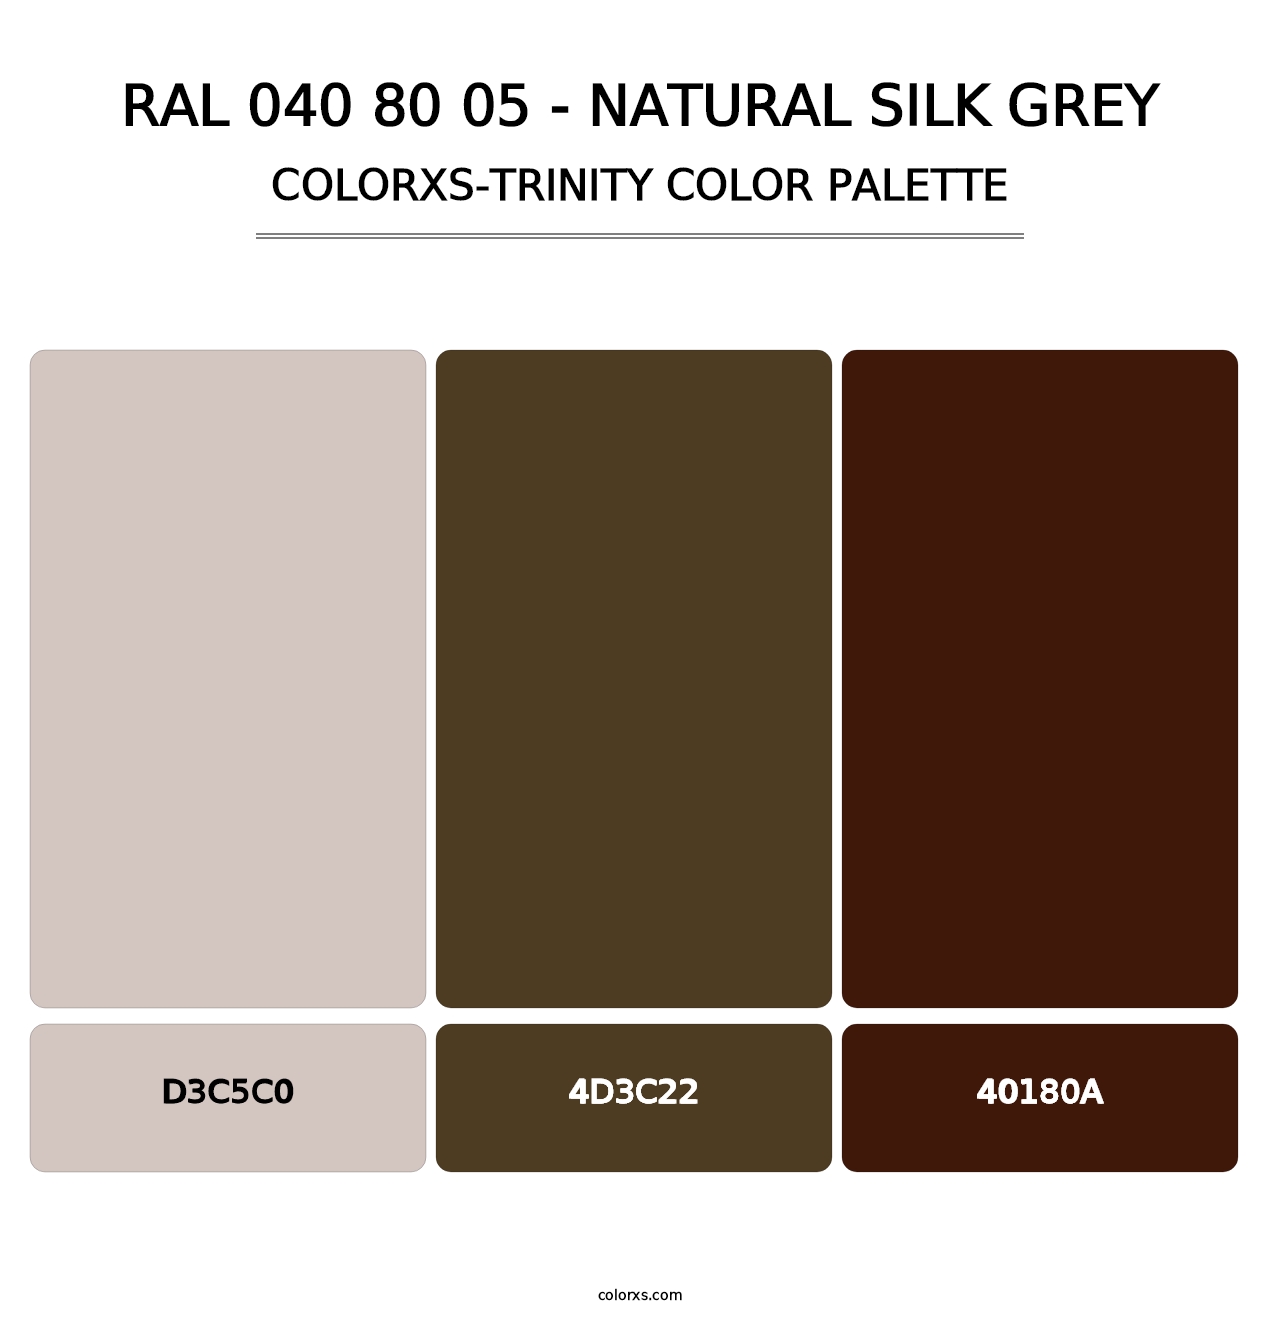 RAL 040 80 05 - Natural Silk Grey - Colorxs Trinity Palette